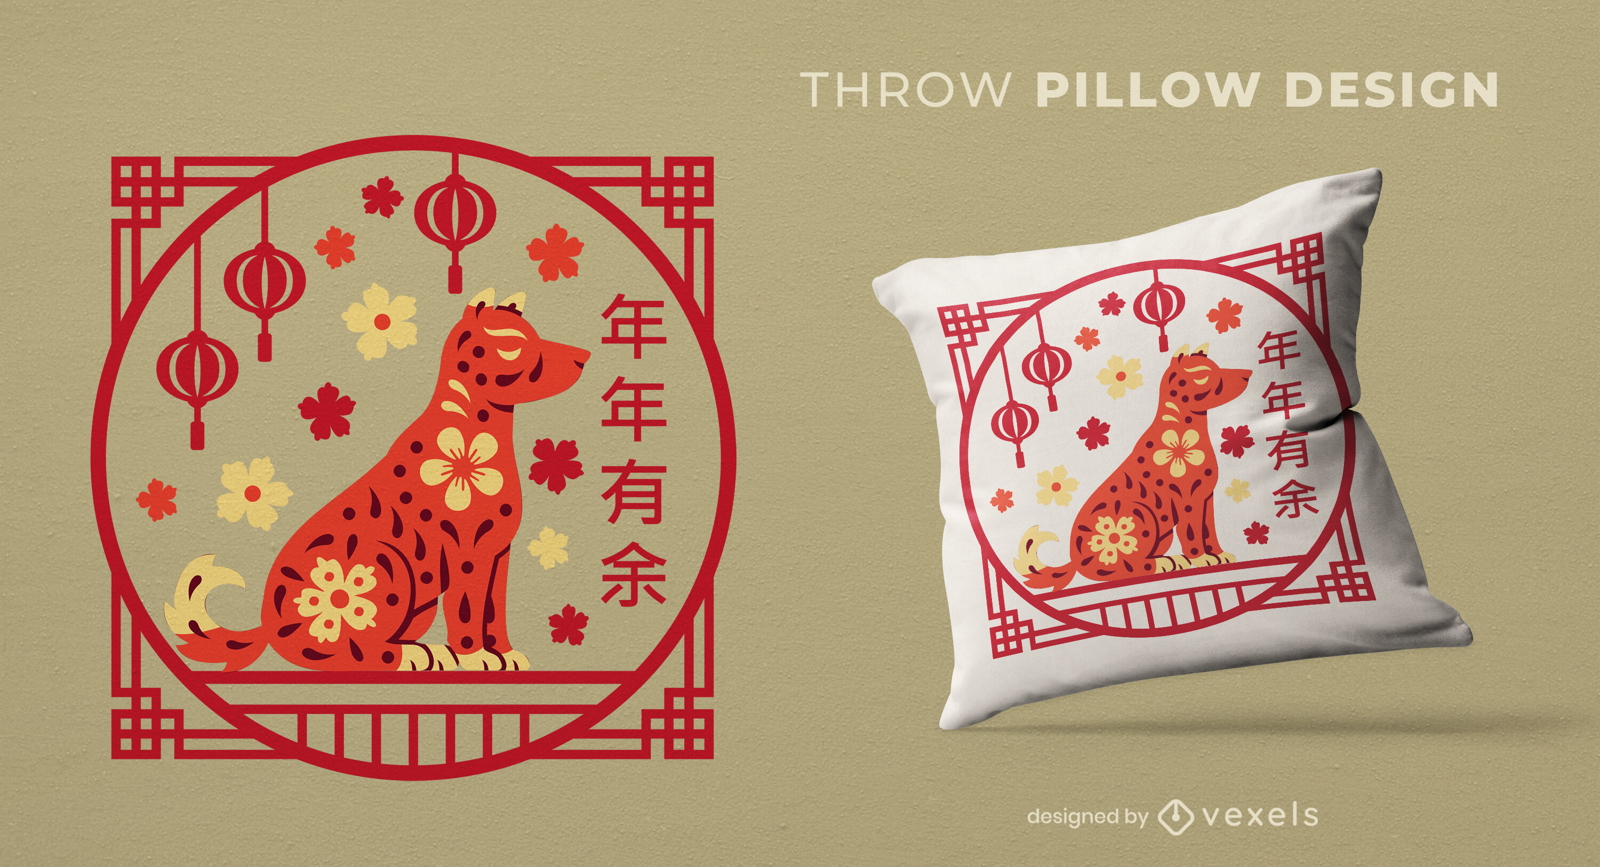 Chinese New Year's dog celebration throw pillow design